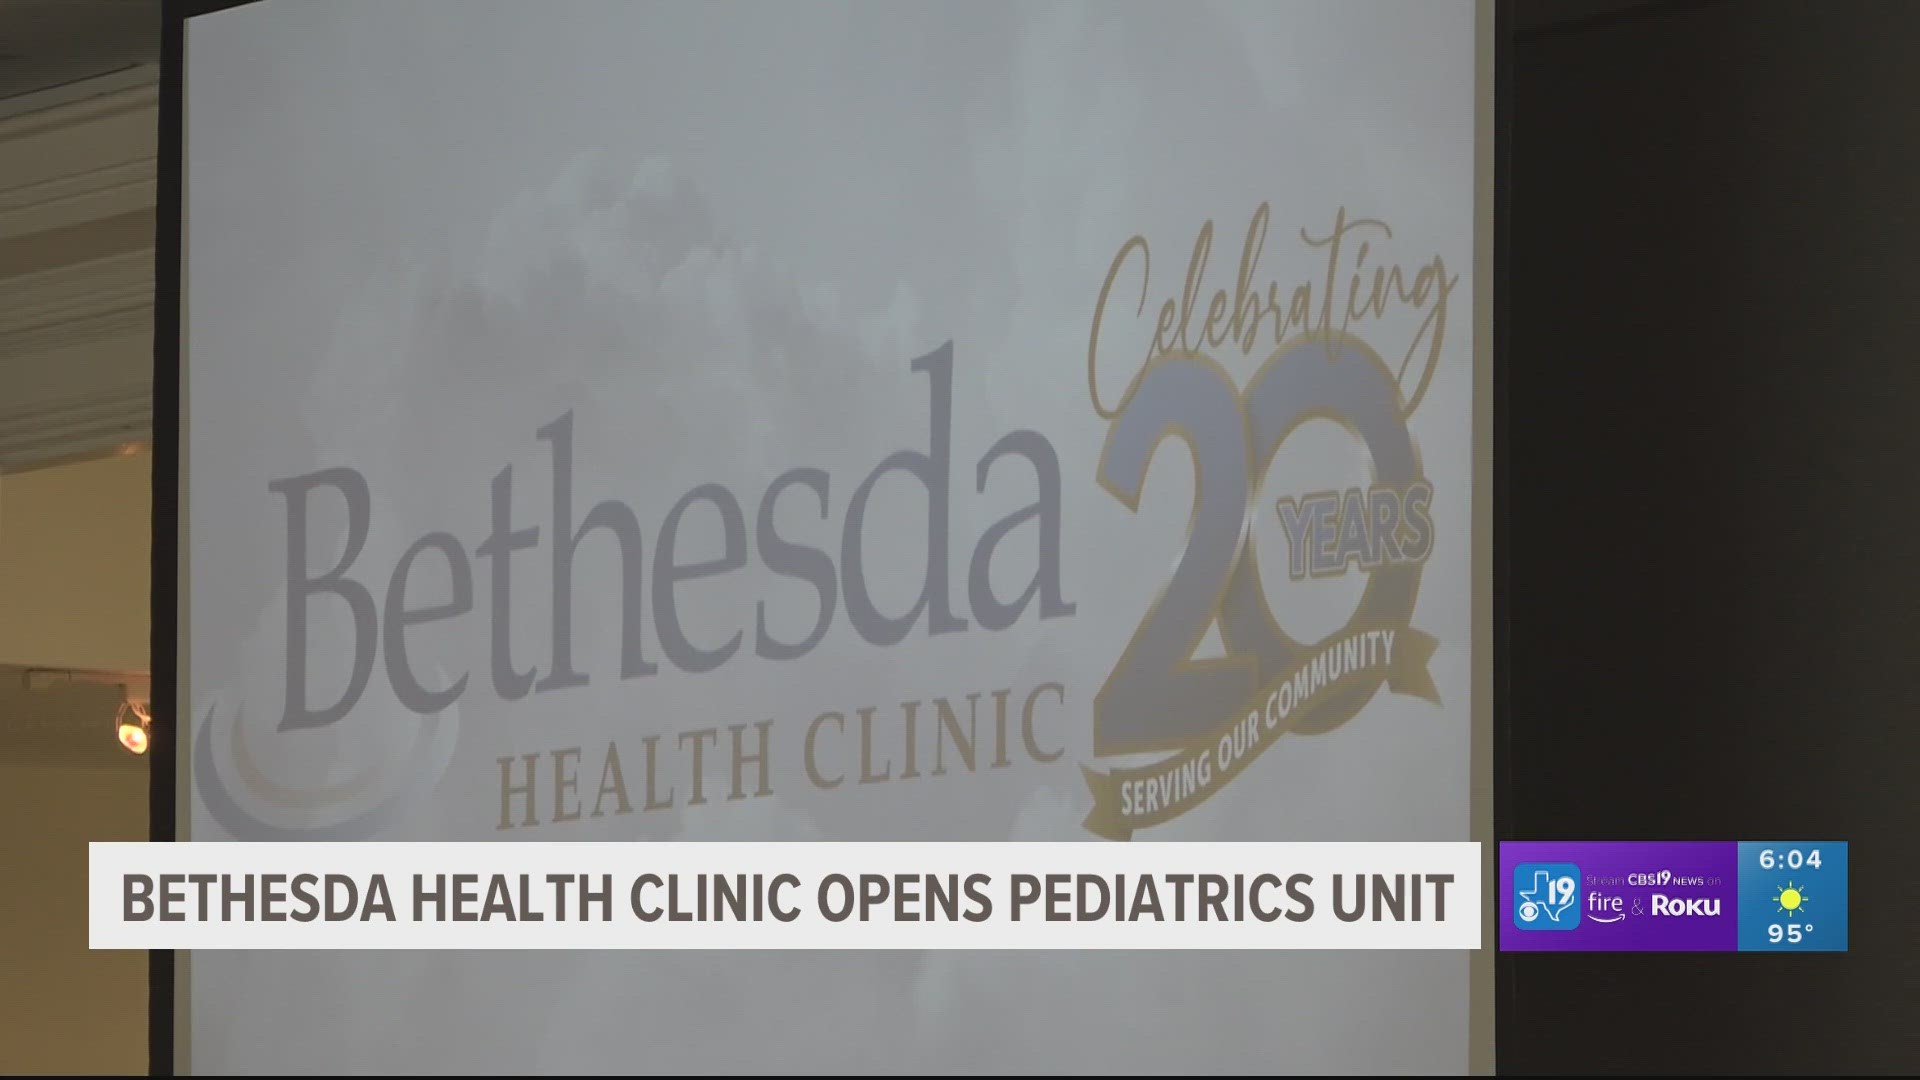 Bethesda Health Clinic in Tyler expands services to children through merger with St. Paul's Children's Services